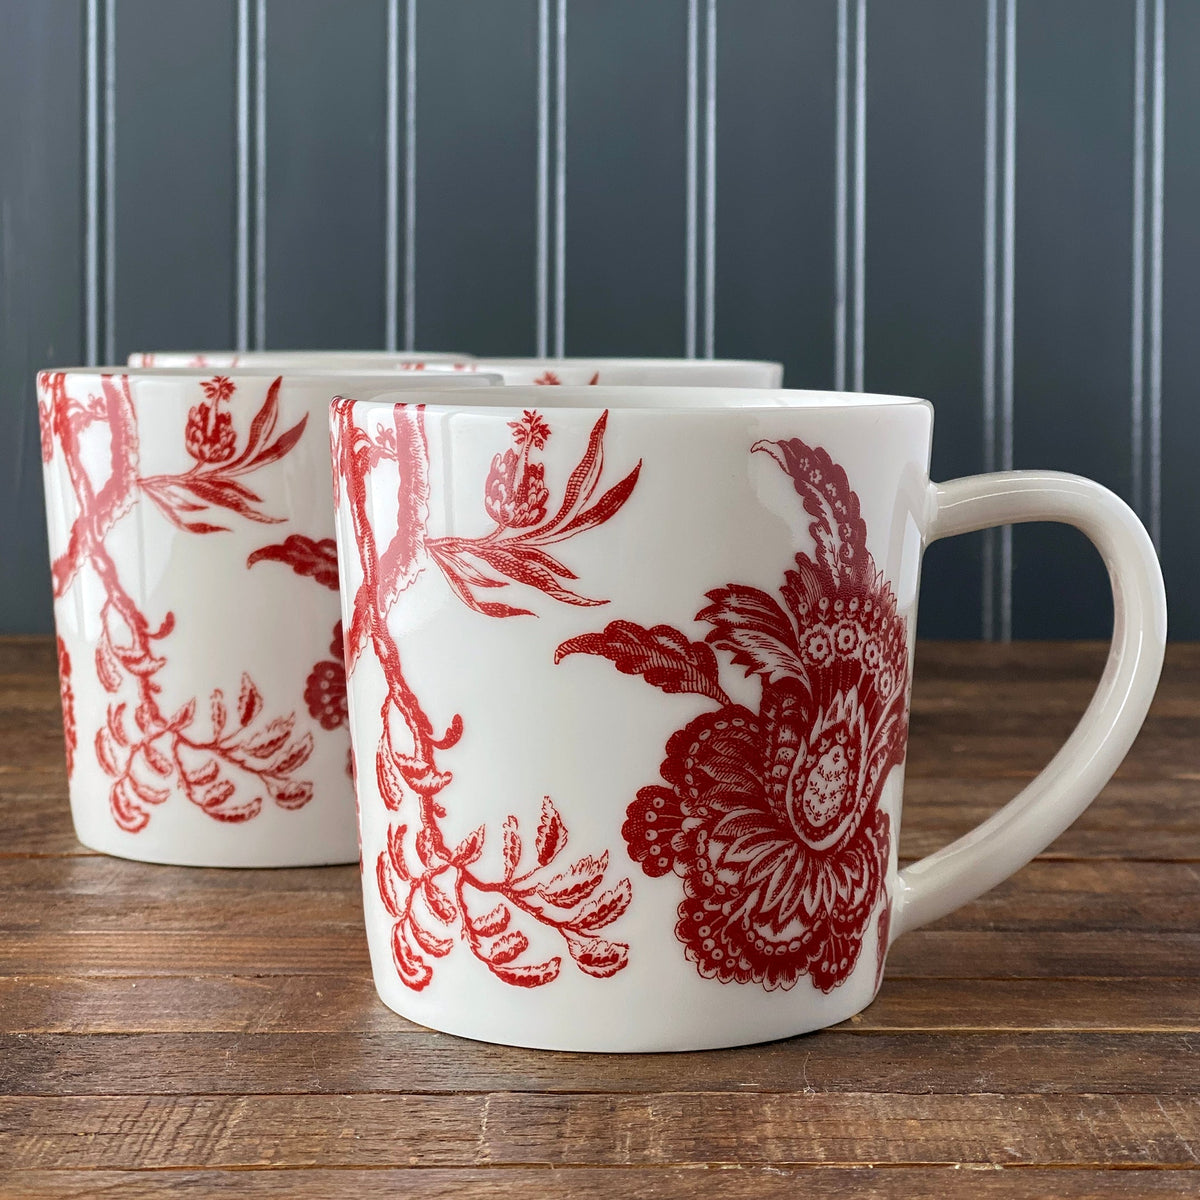 A closeup photo of the red and white Arcadia Crimson Mug from Caskata shows the detailed design pulled from the Williamsburg Collection archives.